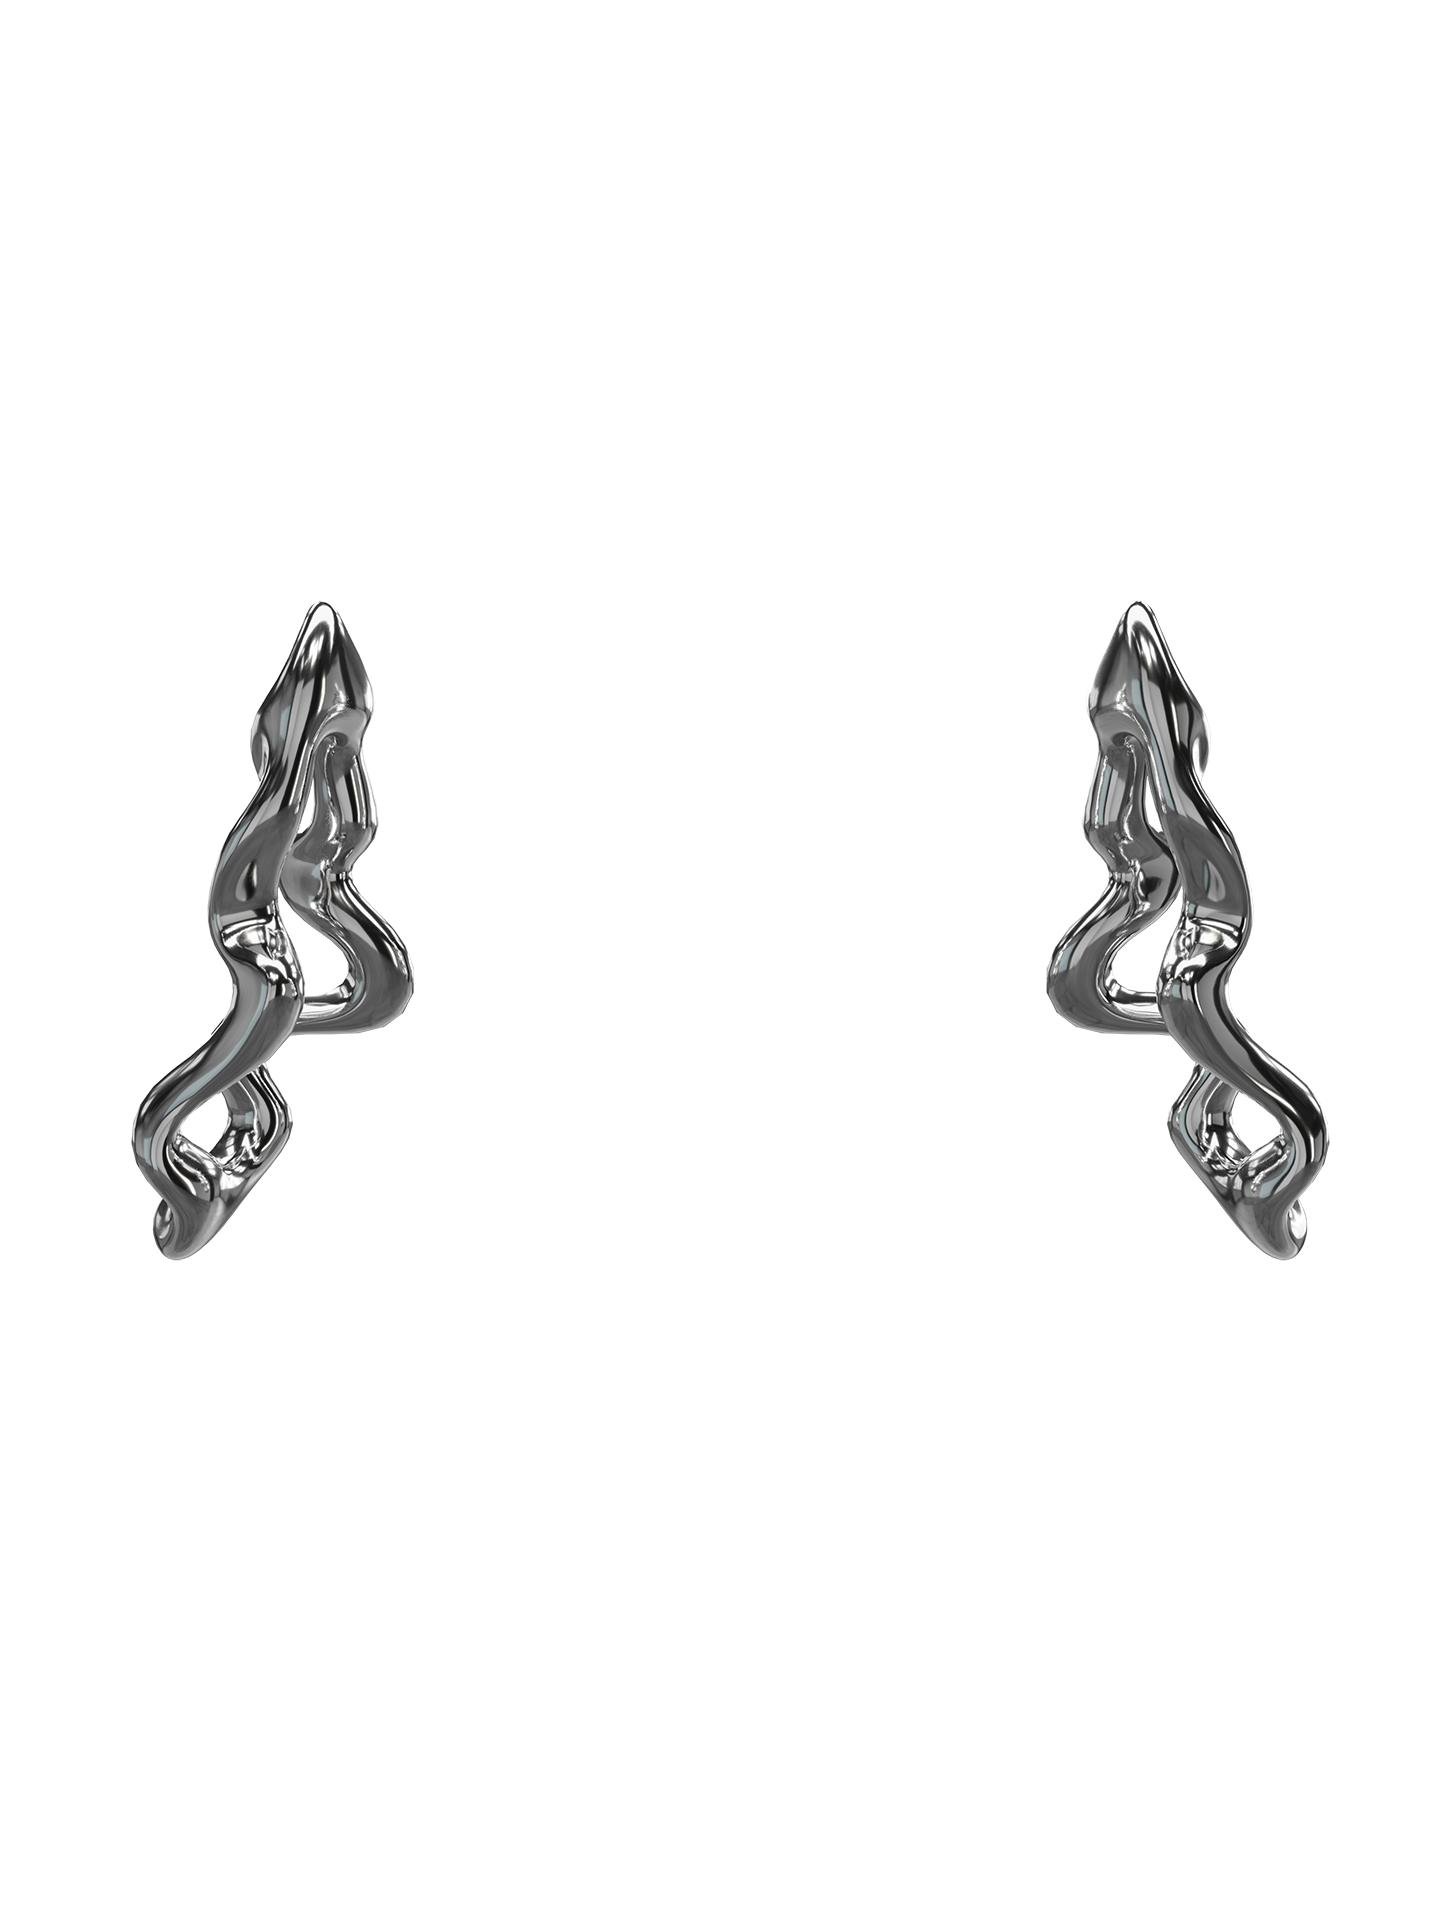 MELTED EARRINGS by VOUS X V1S4G3